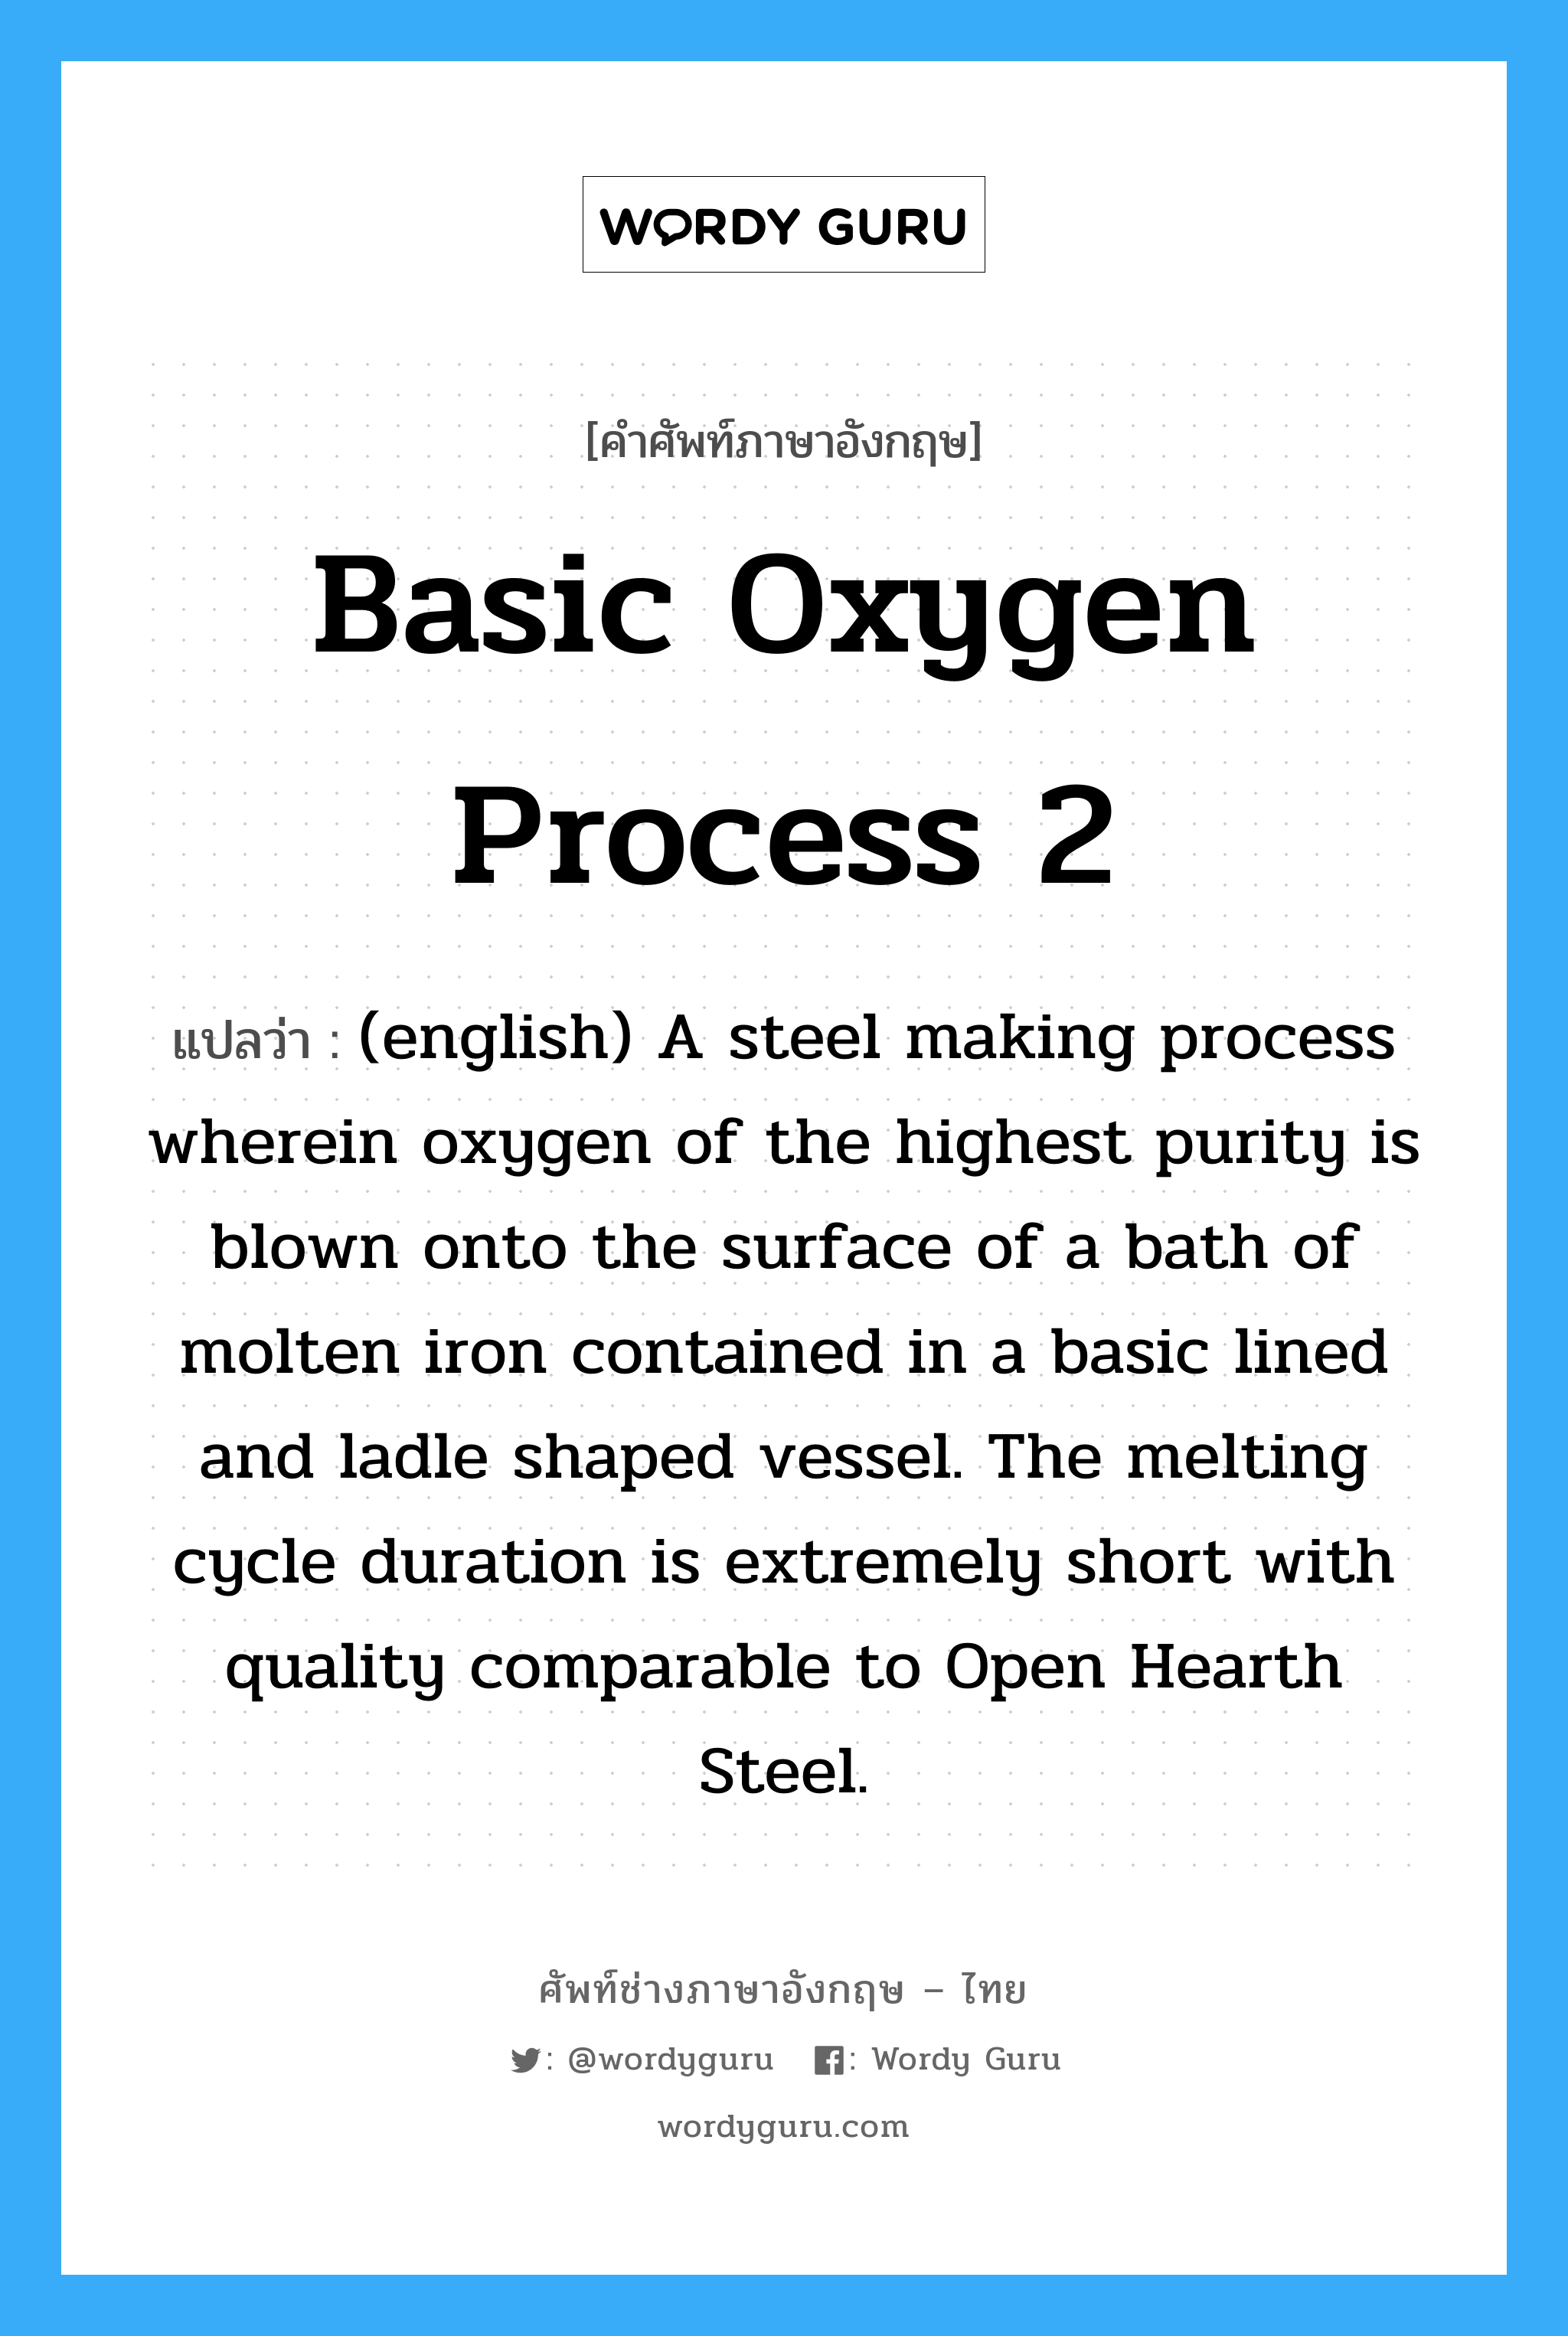 Basic Oxygen Process 2 แปลว่า?, คำศัพท์ช่างภาษาอังกฤษ - ไทย Basic Oxygen Process 2 คำศัพท์ภาษาอังกฤษ Basic Oxygen Process 2 แปลว่า (english) A steel making process wherein oxygen of the highest purity is blown onto the surface of a bath of molten iron contained in a basic lined and ladle shaped vessel. The melting cycle duration is extremely short with quality comparable to Open Hearth Steel.